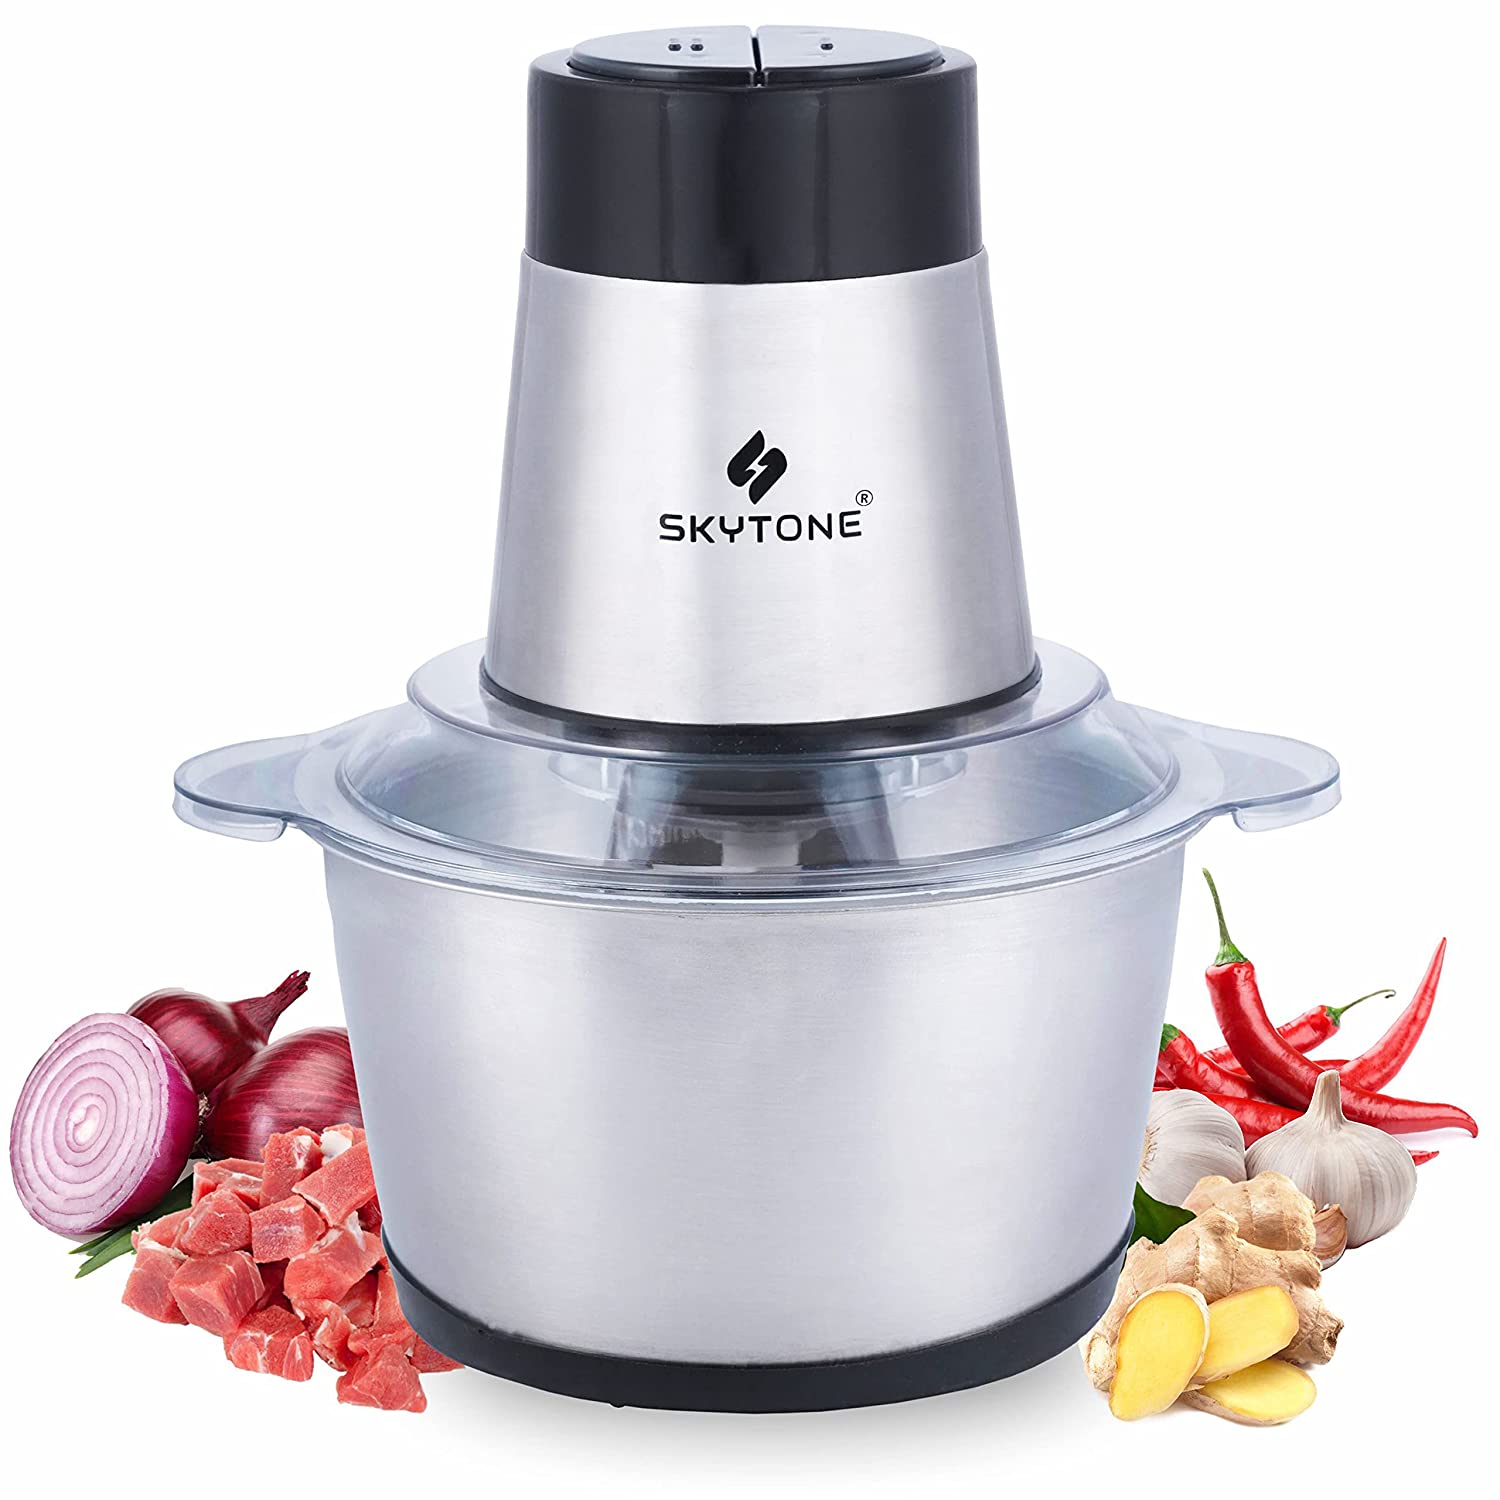 Skytone-Stainless-Steel-Electric-Chopper